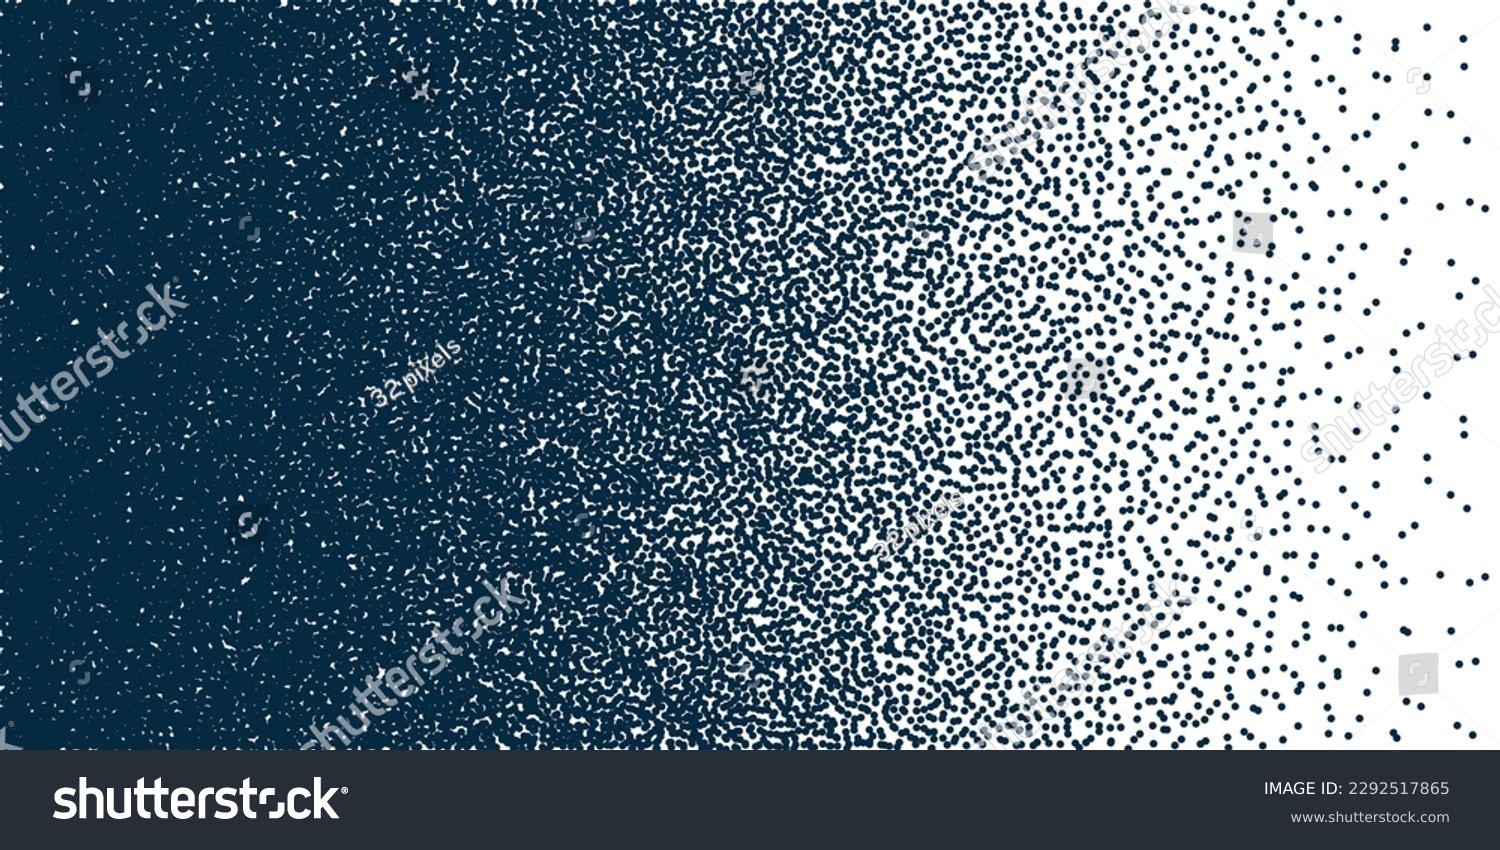 Stipple pattern, dotted geometric background. Stippling, dotwork drawing, shading using dots. Pixel disintegration, random halftone effect. White noise grainy texture. Vector illustration #2292517865